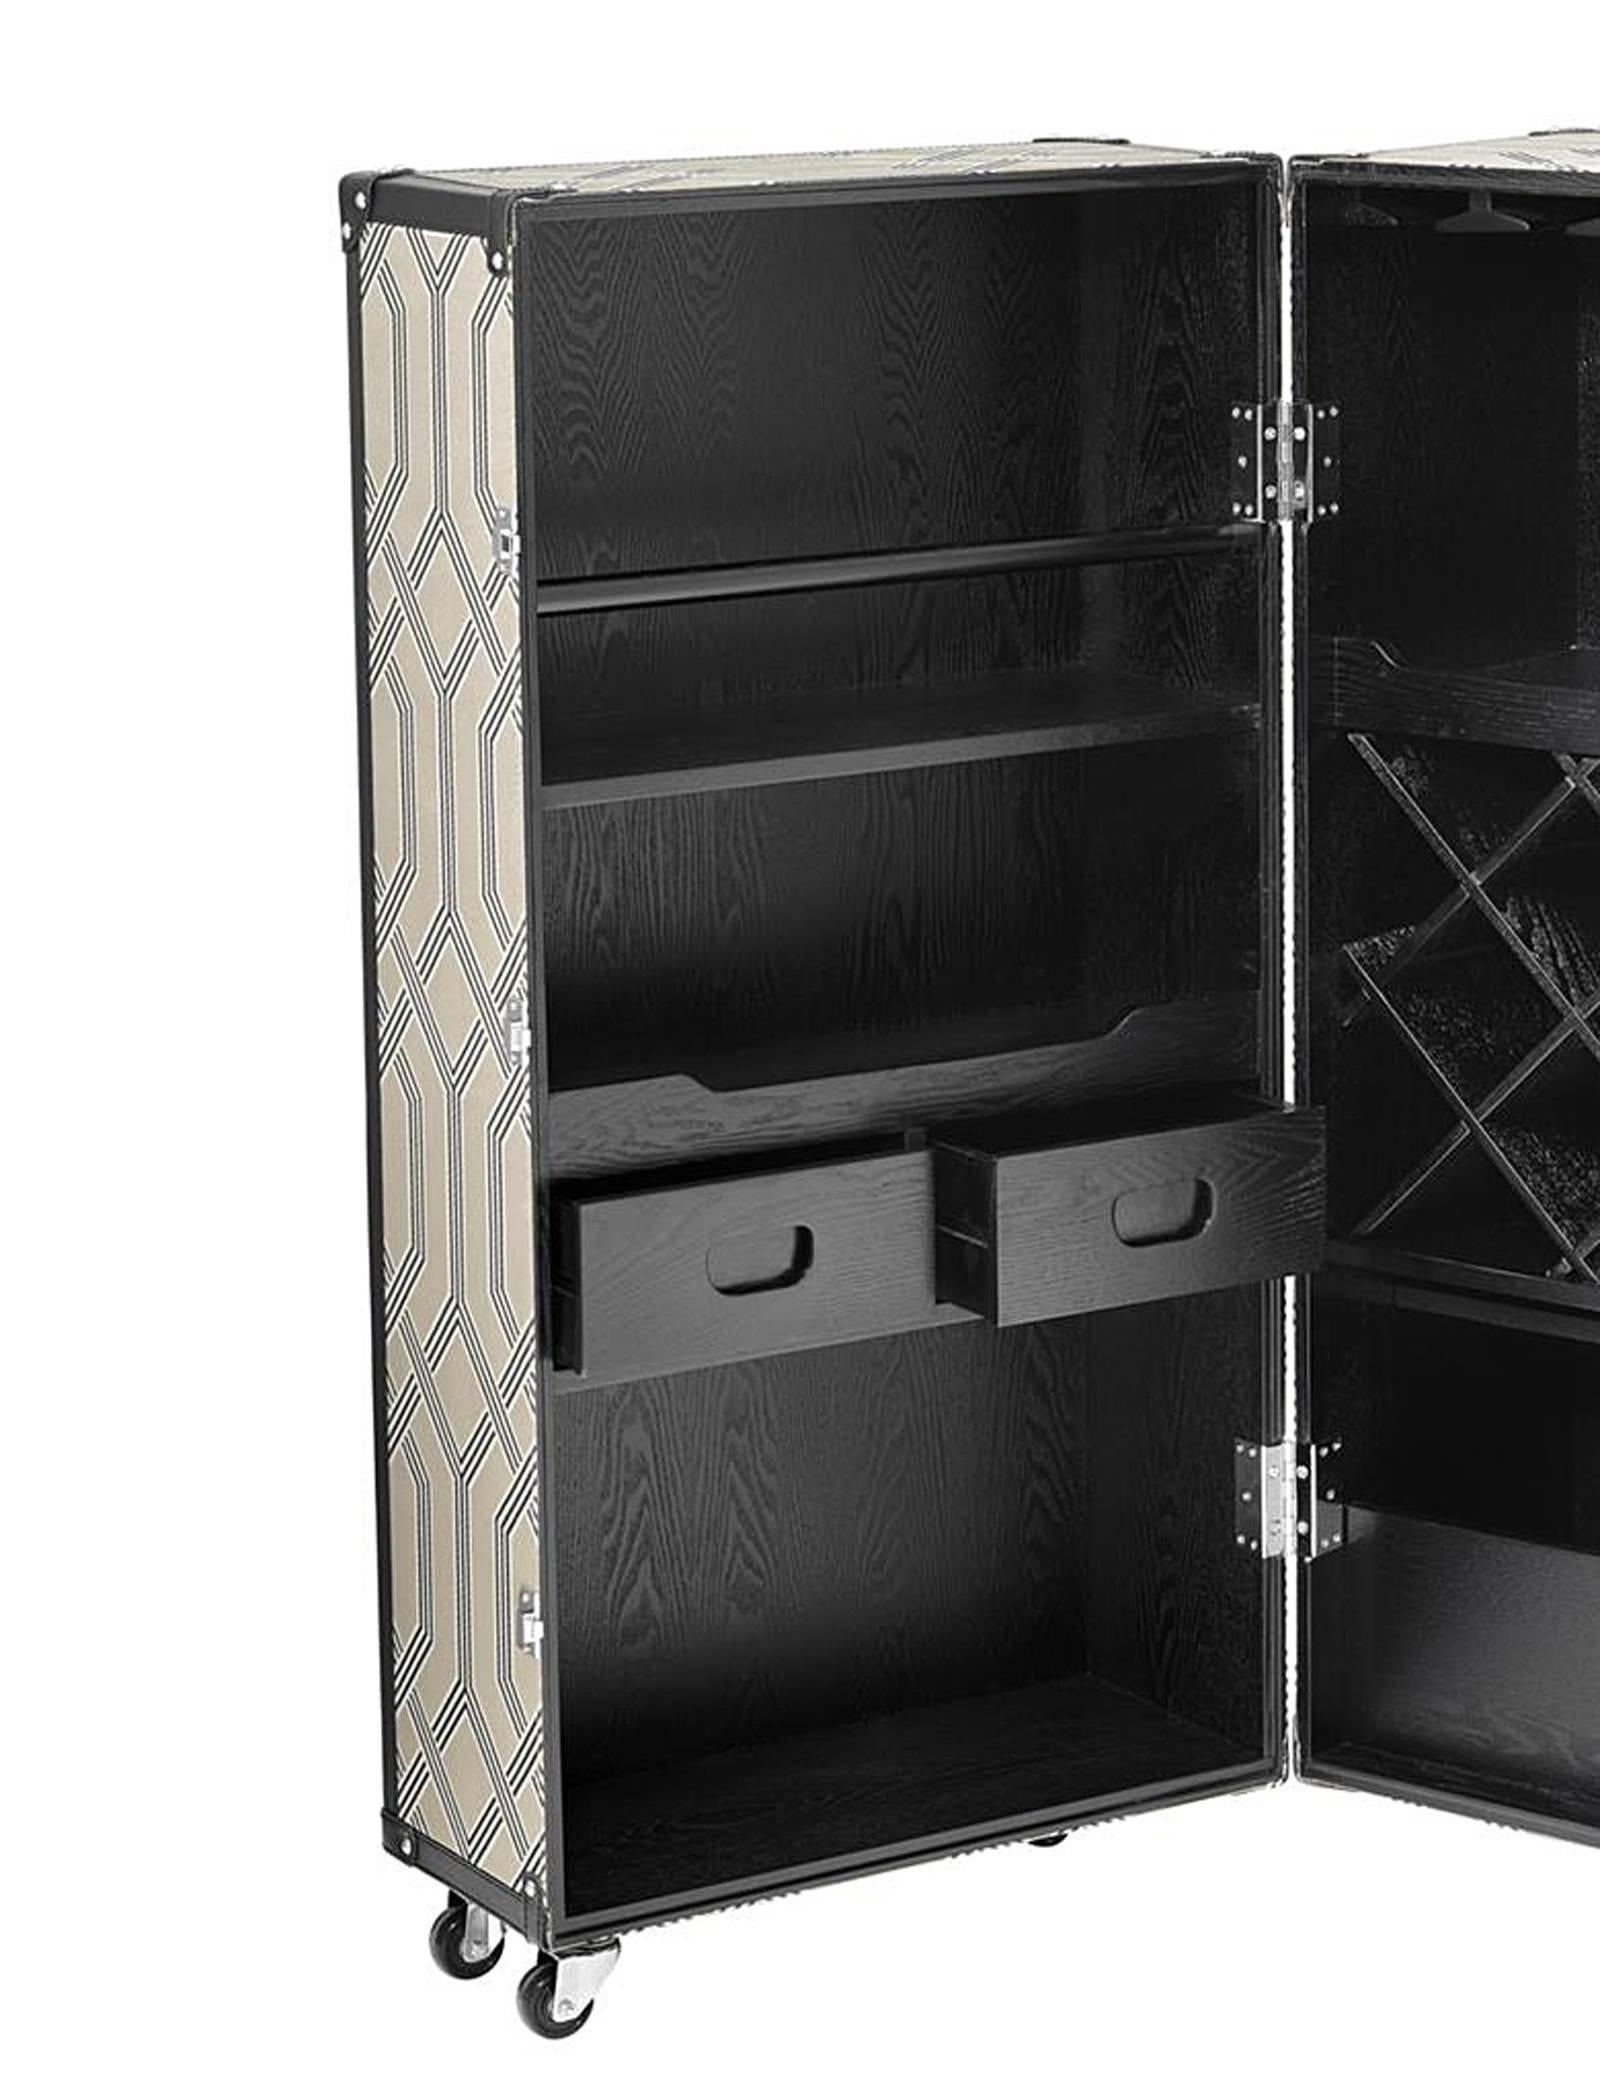 Bar wine in black ashwood, polished nickel finishes
and fabric covered. Bar on trolleys. Hanging space 
for glasses inside, wine bottle storage rack, two drawers 
and open shelving. Handcrafted work.
Closed: L 88 x D 88 x H 122cm.
Open: L 117 x